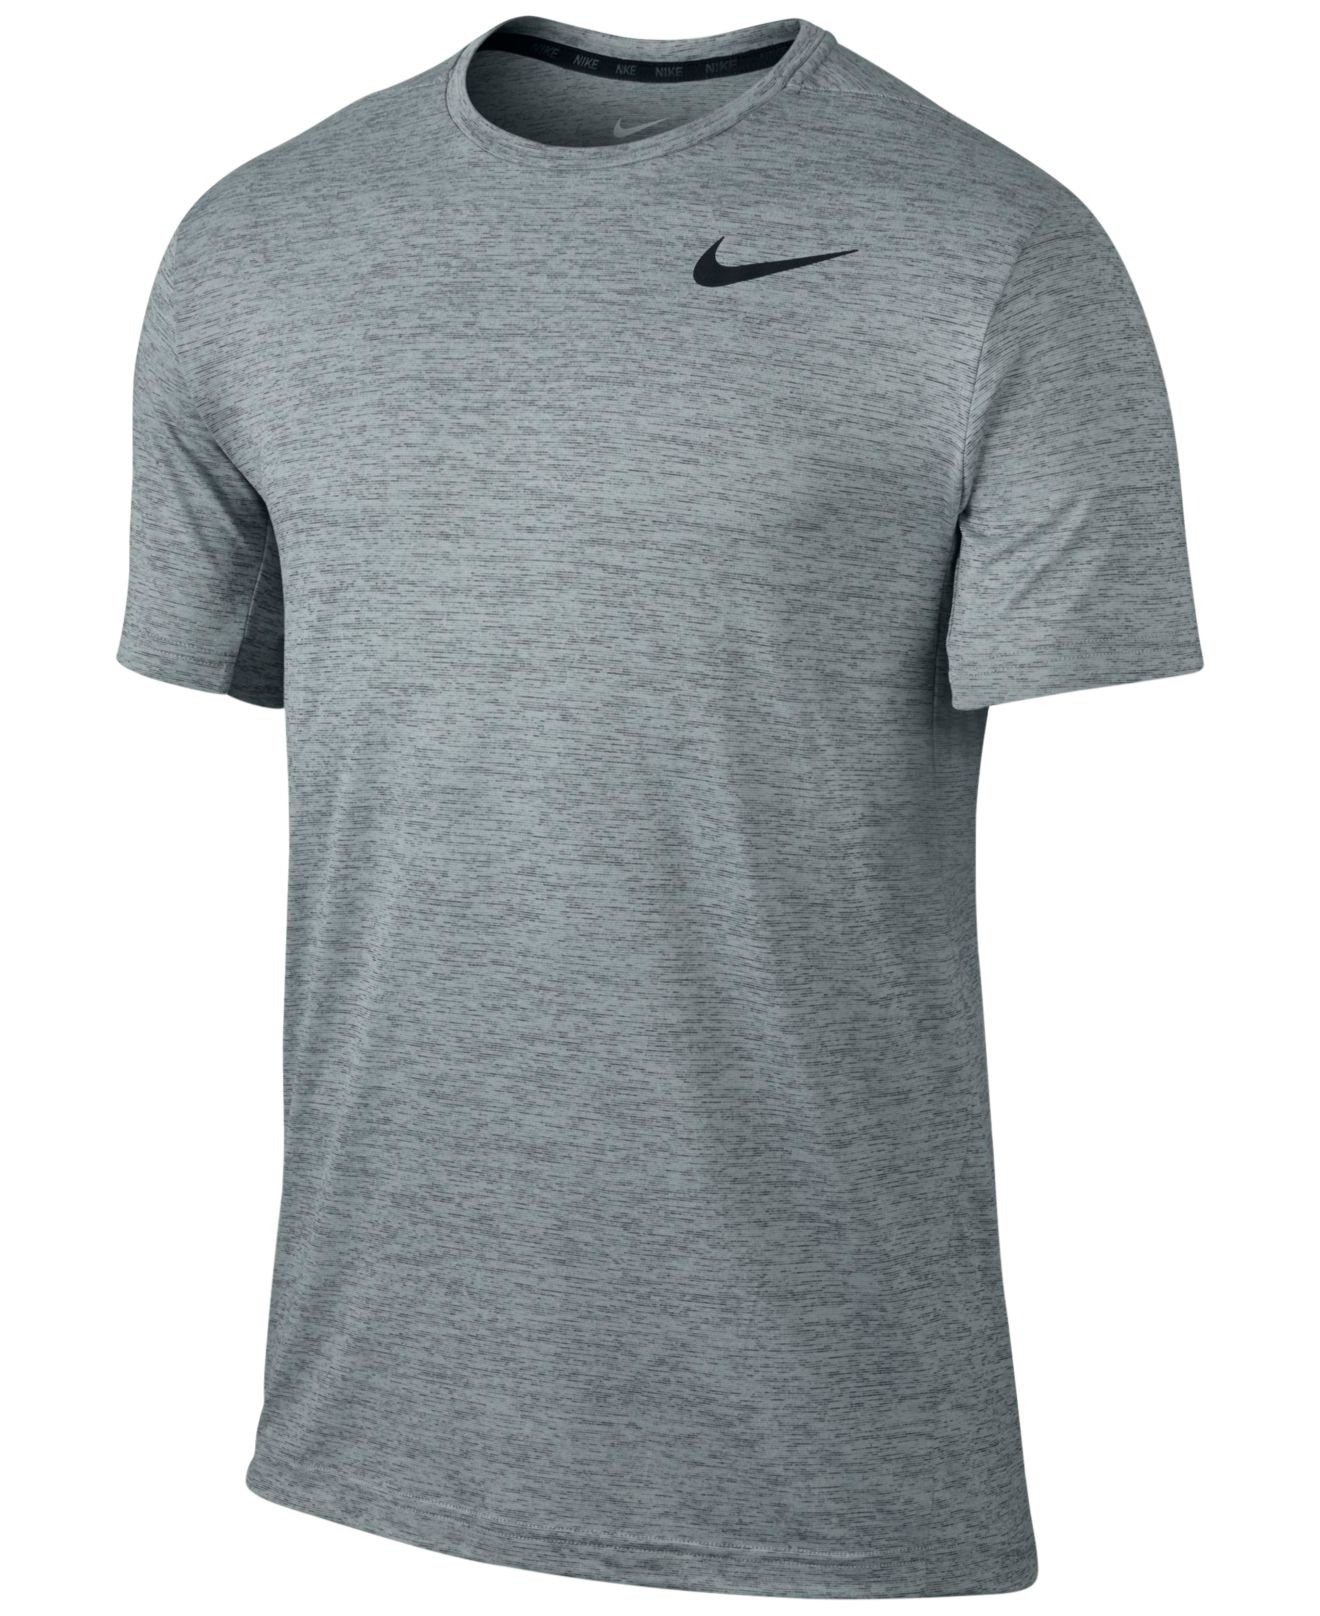 Lyst - Nike Men's Dri-fit Touch Ultra-soft T-shirt in Gray for Men